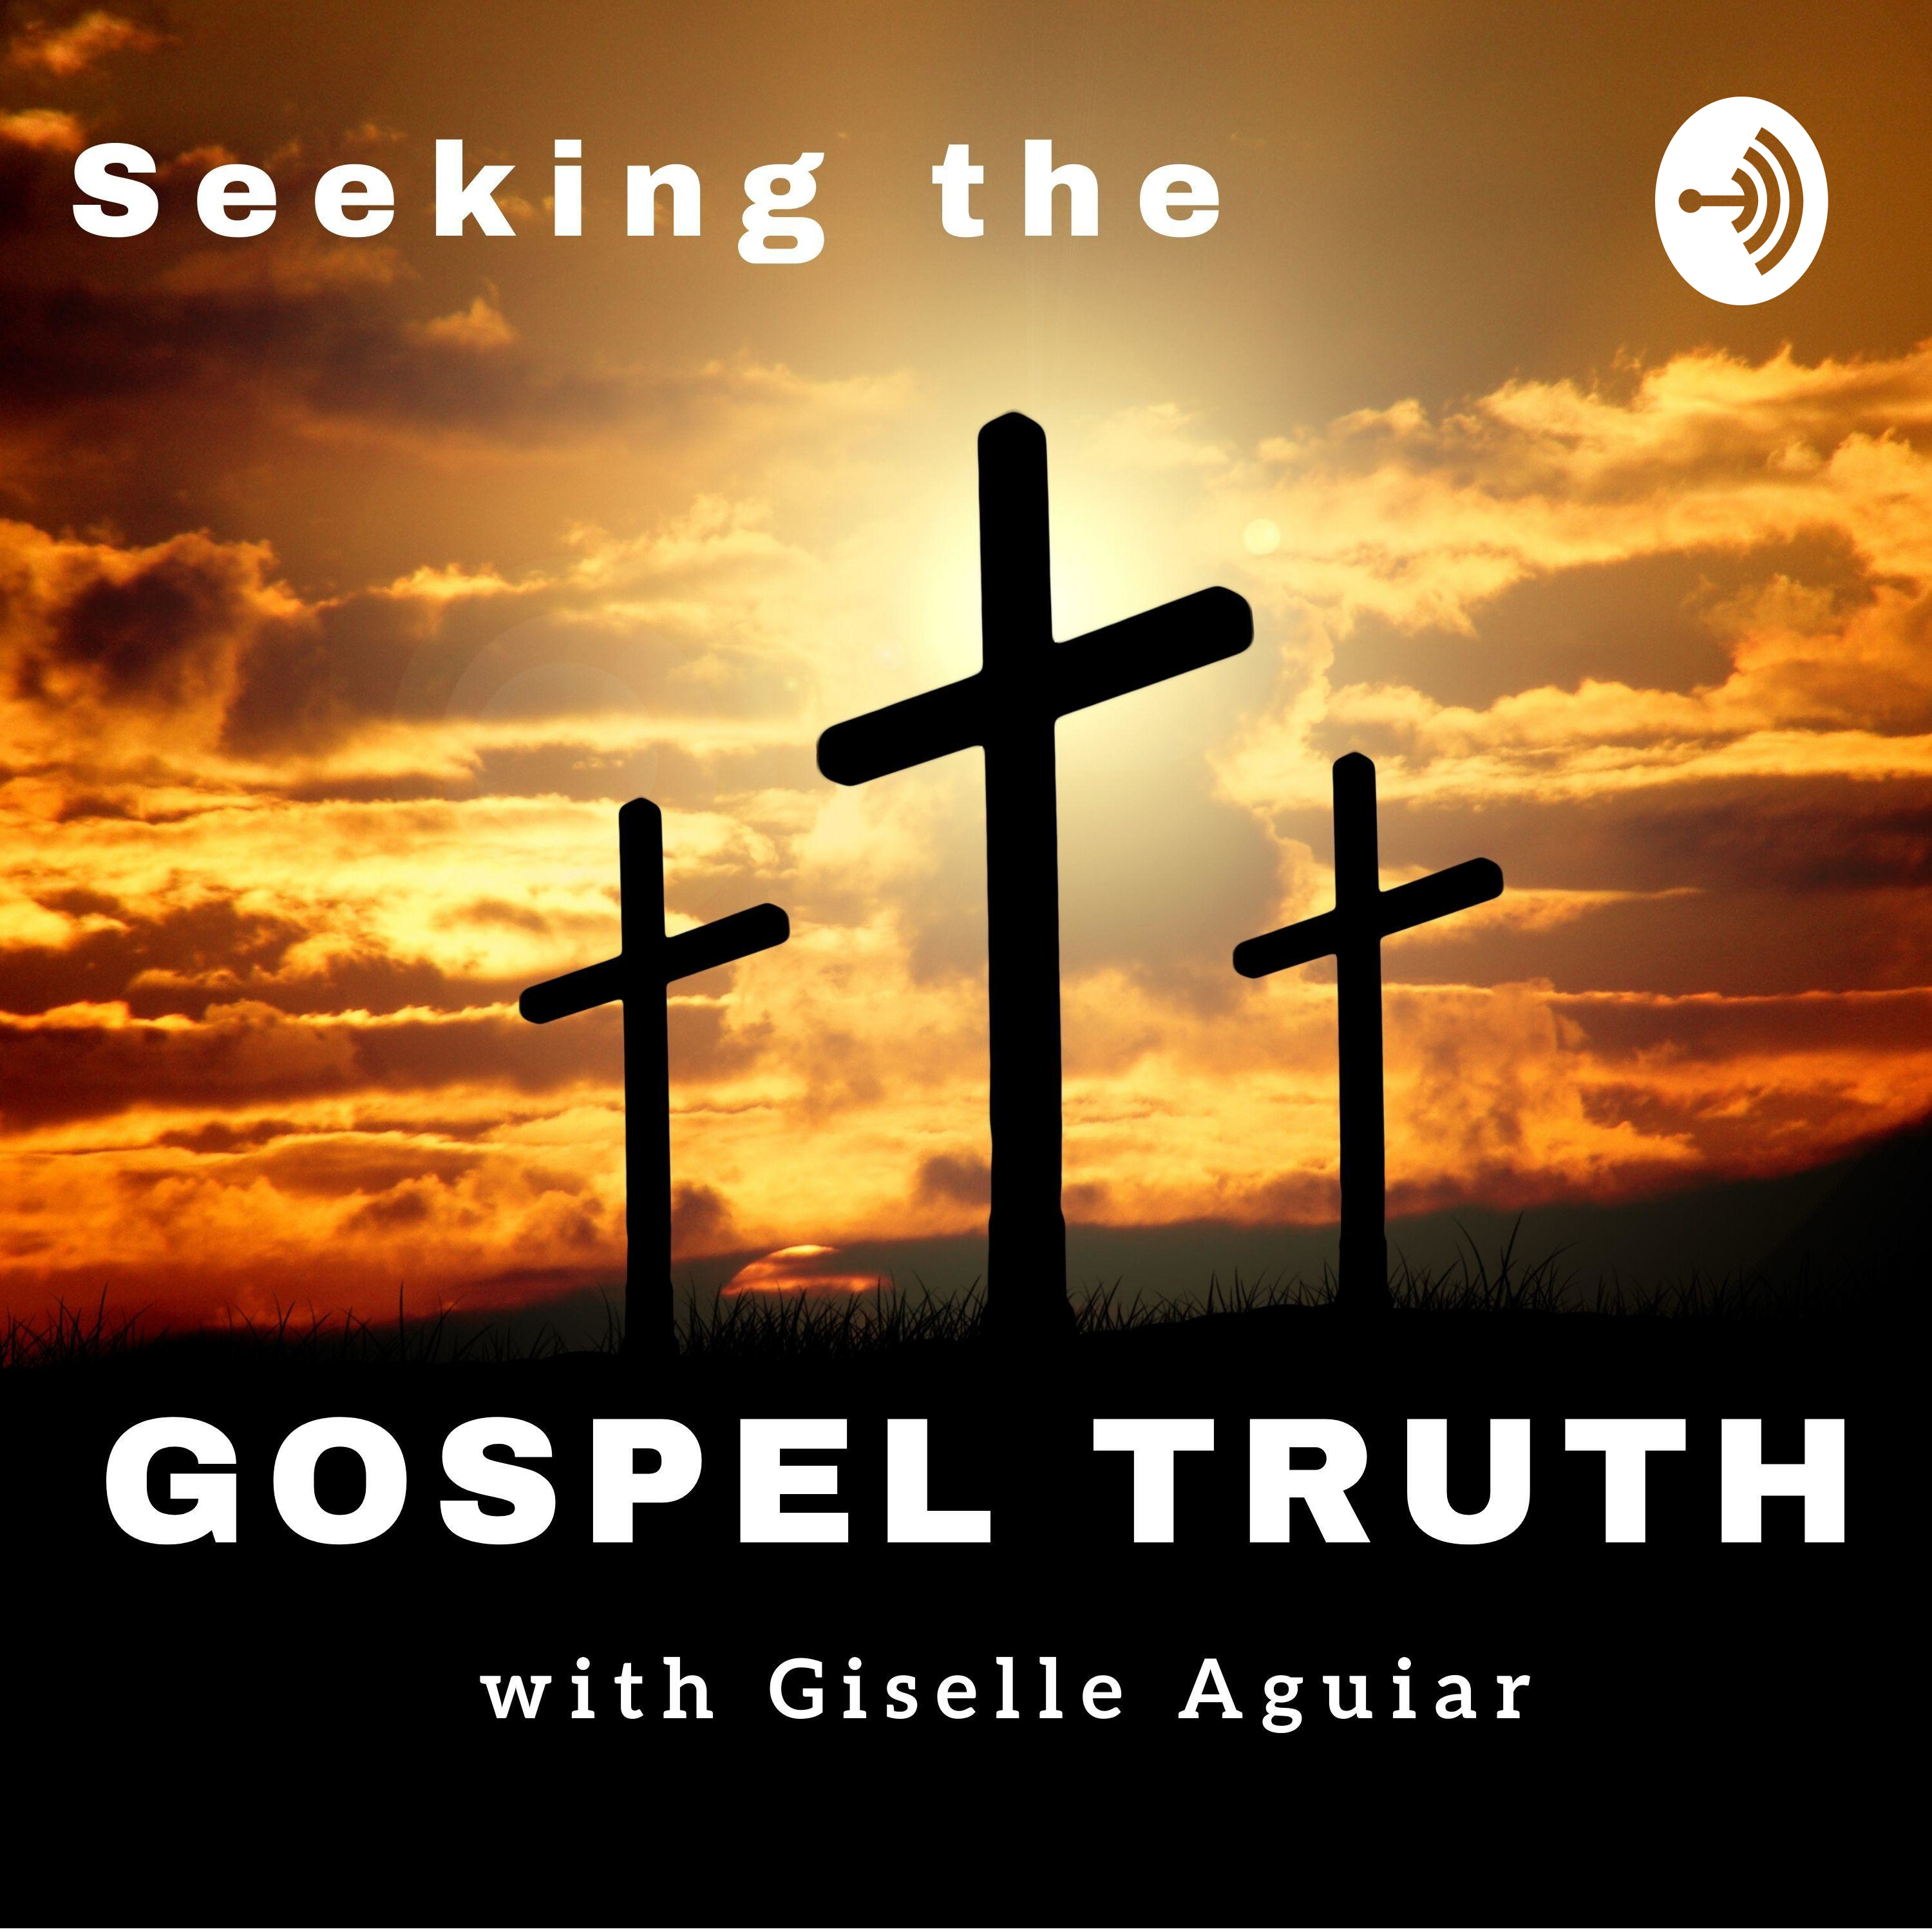 Subscribe to my Podcast: Seeking the Gospel Truth